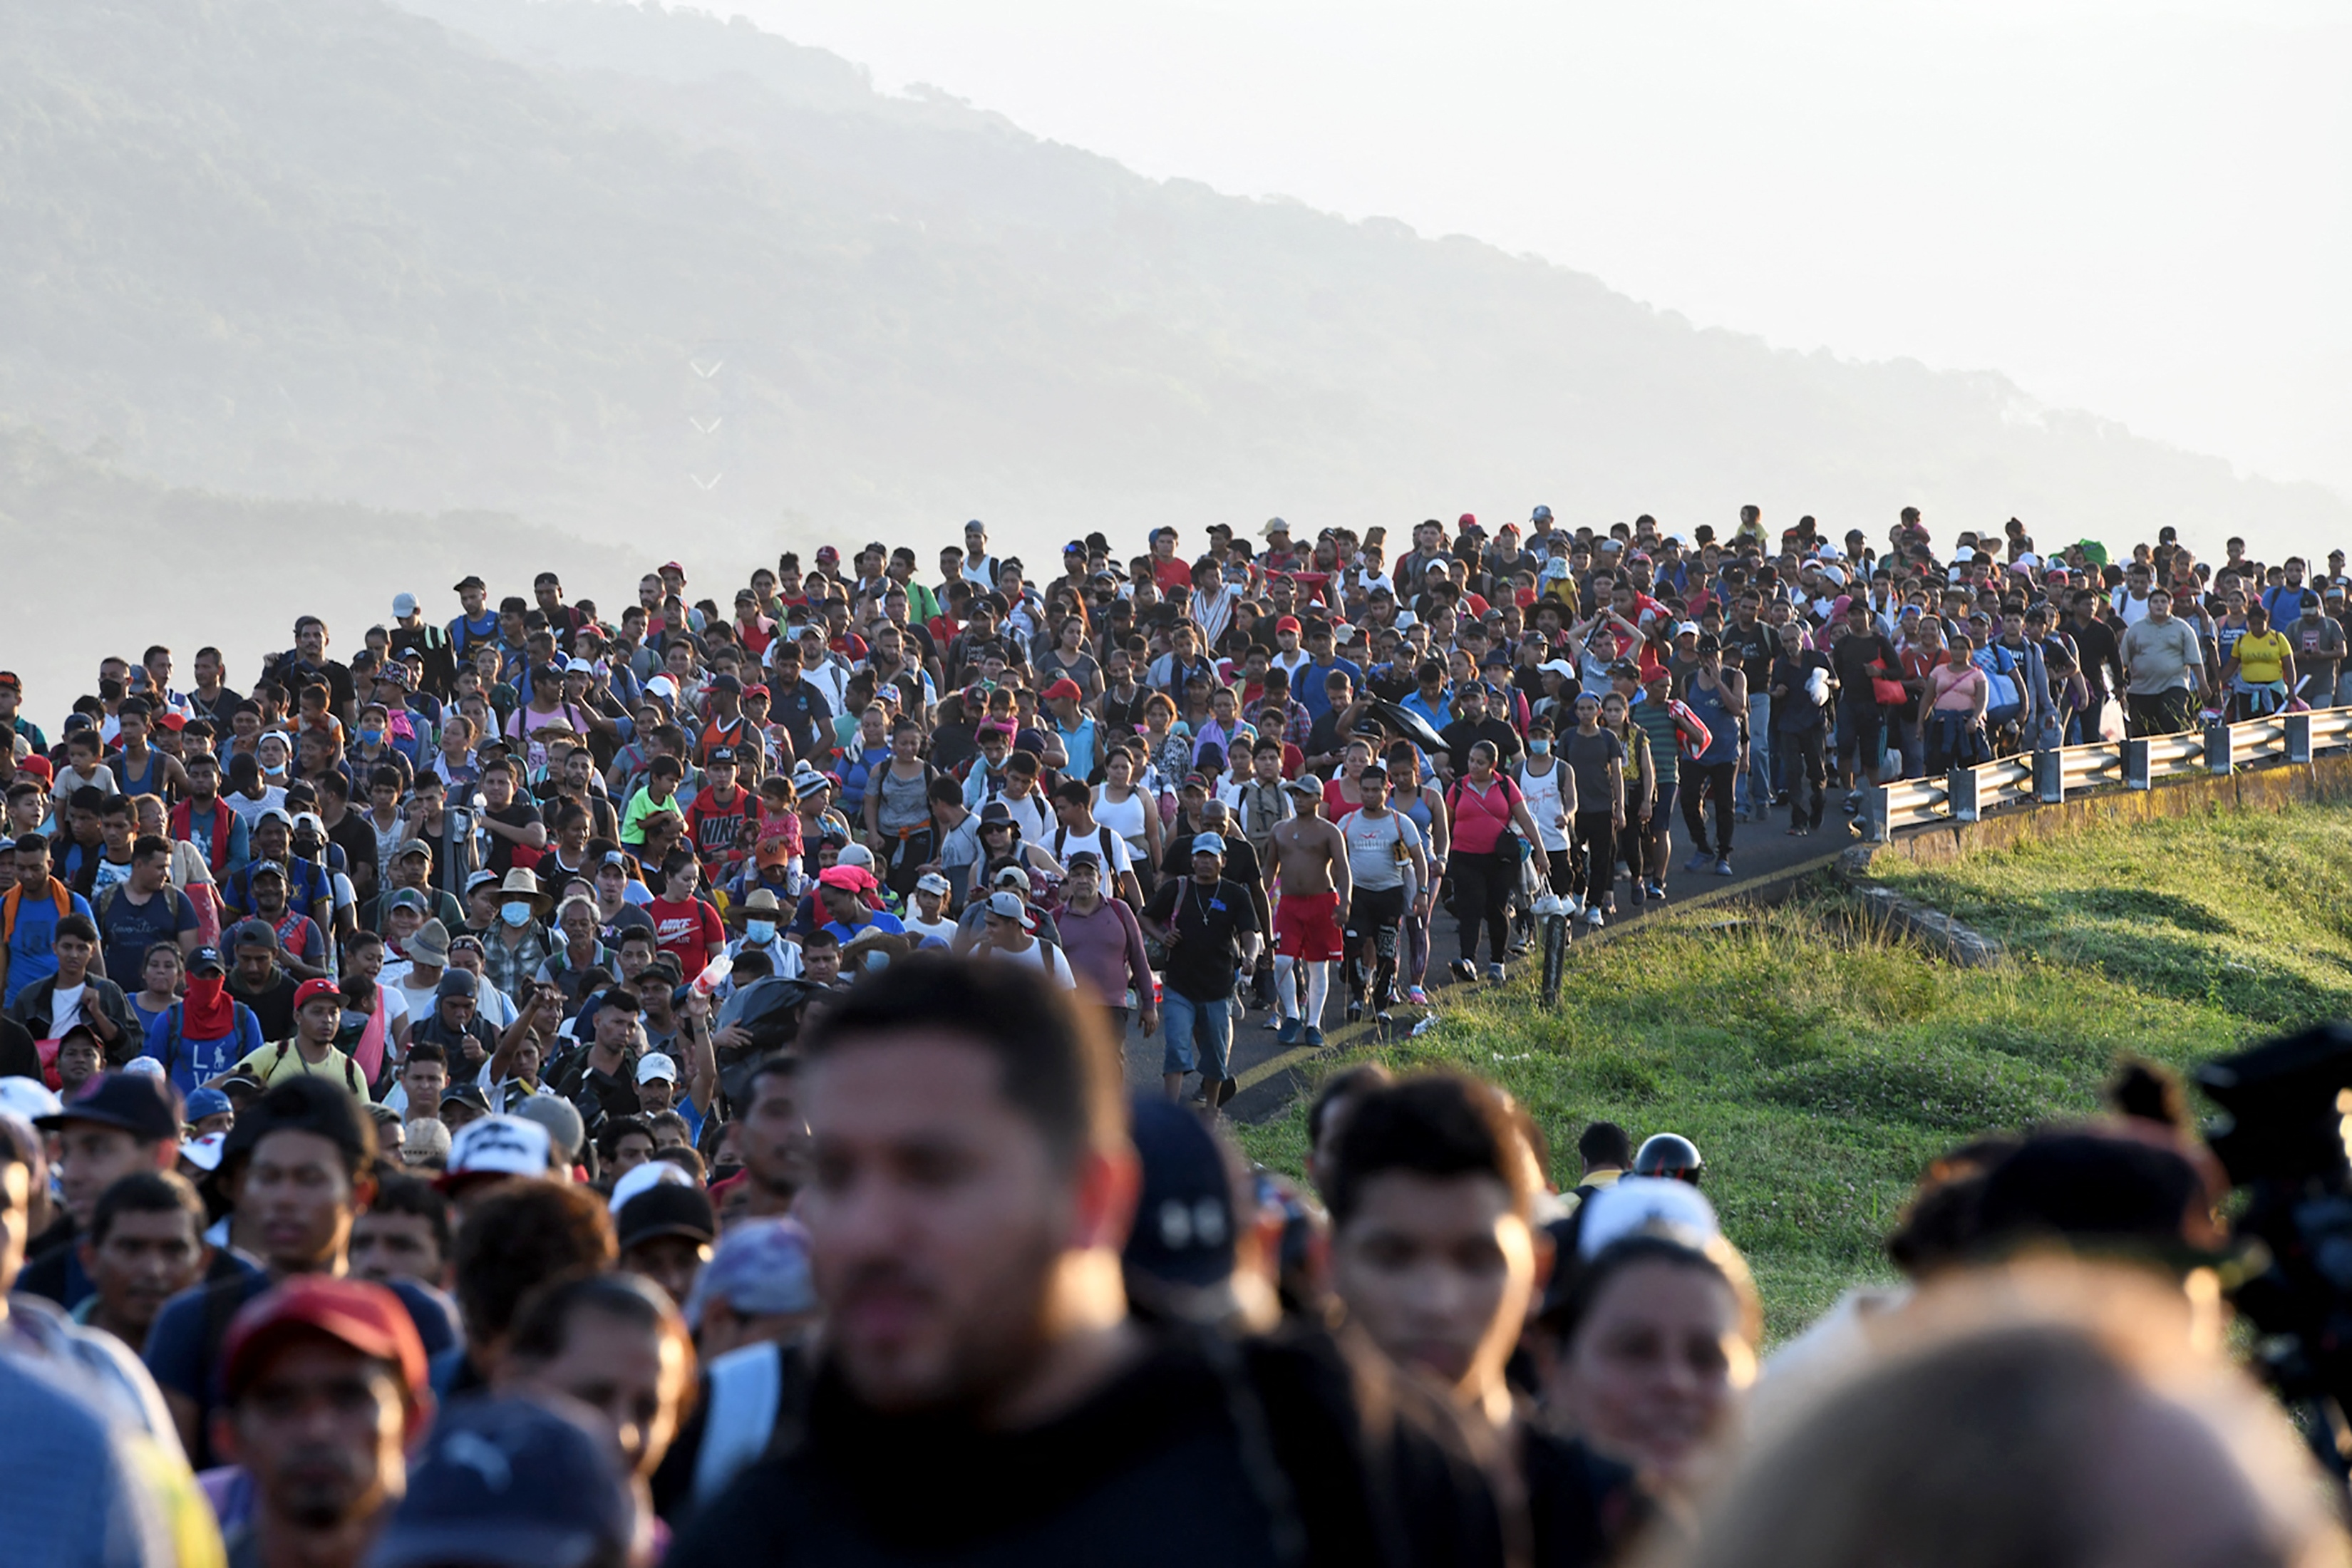 Over 2M Migrants Came to the Border in 2021, 565K More Than the Past